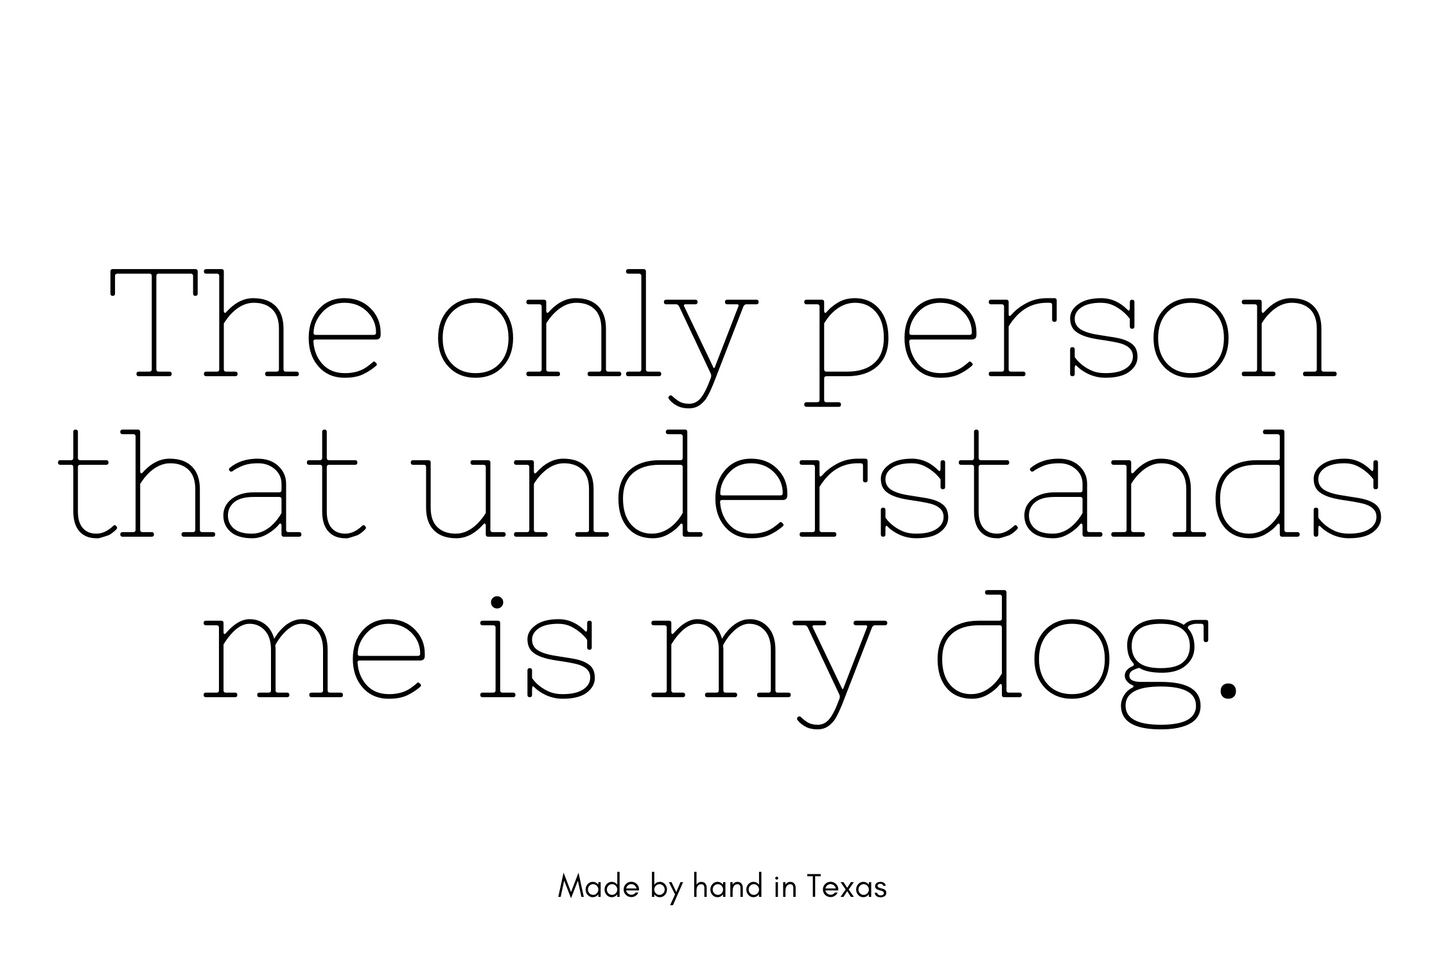 The only person who understands me is my dog.